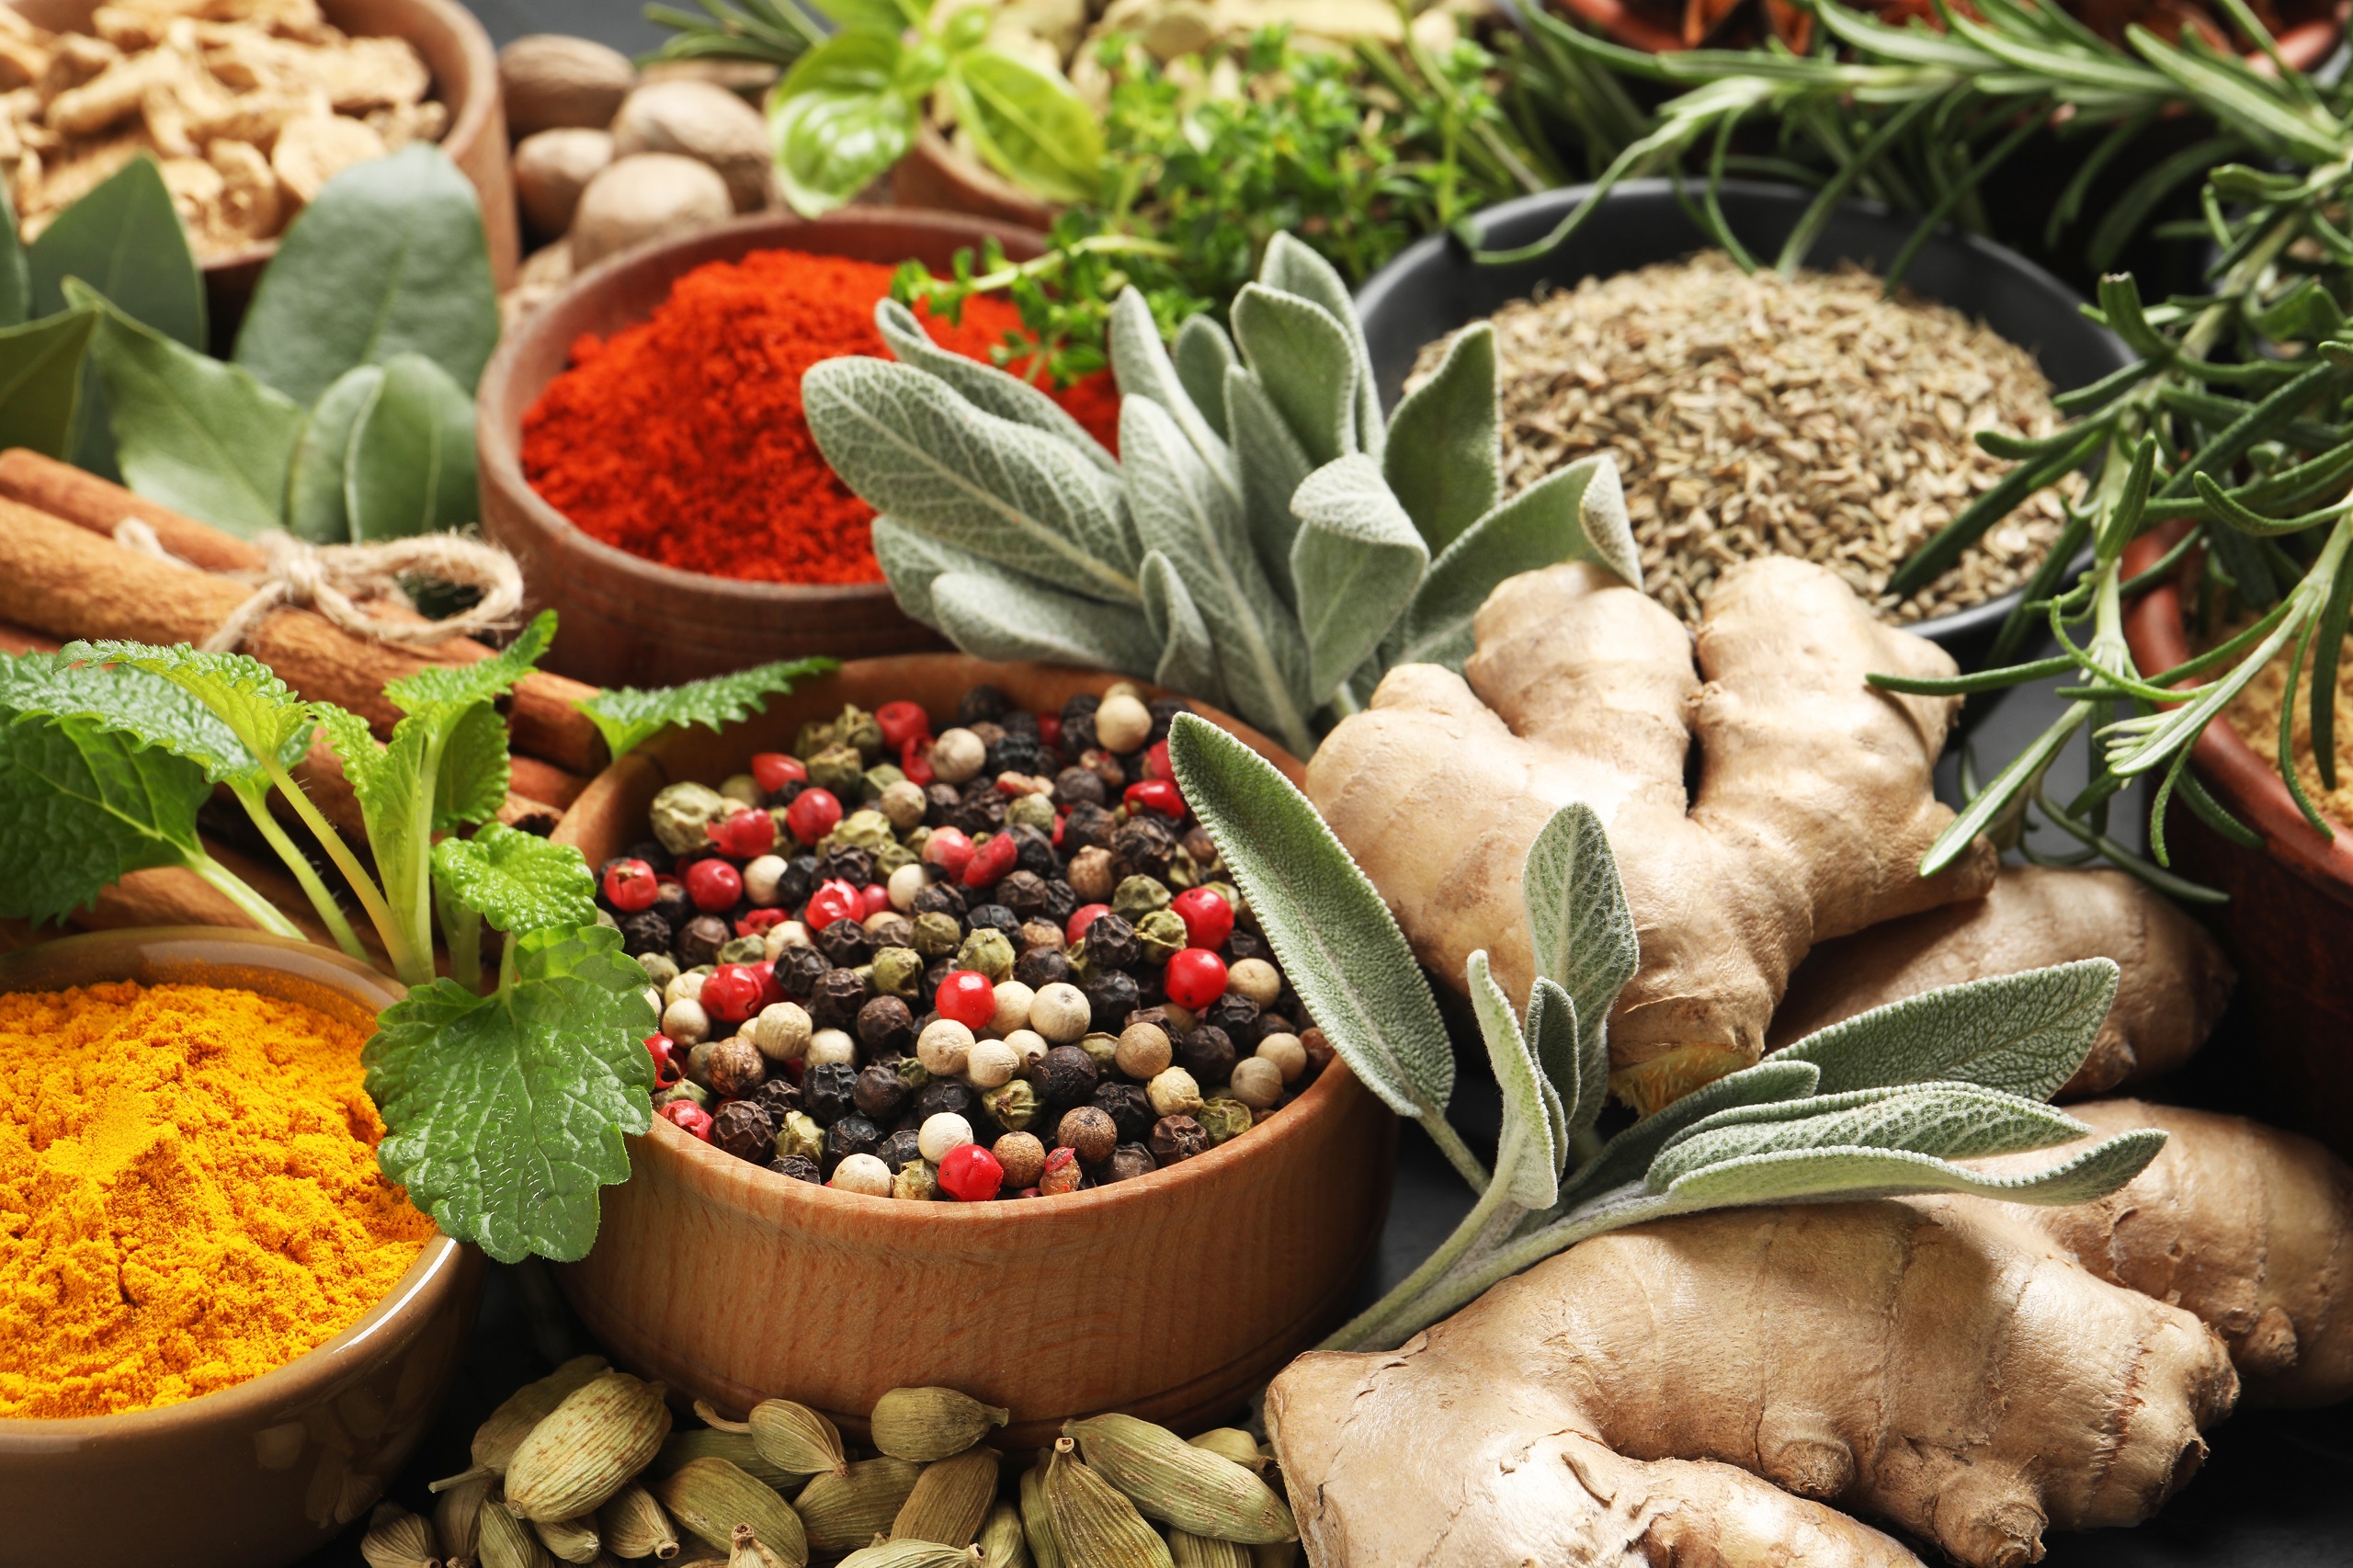 An assortment of fresh herbs and spices arranged neatly to represent ingredients used in making healthy soup.